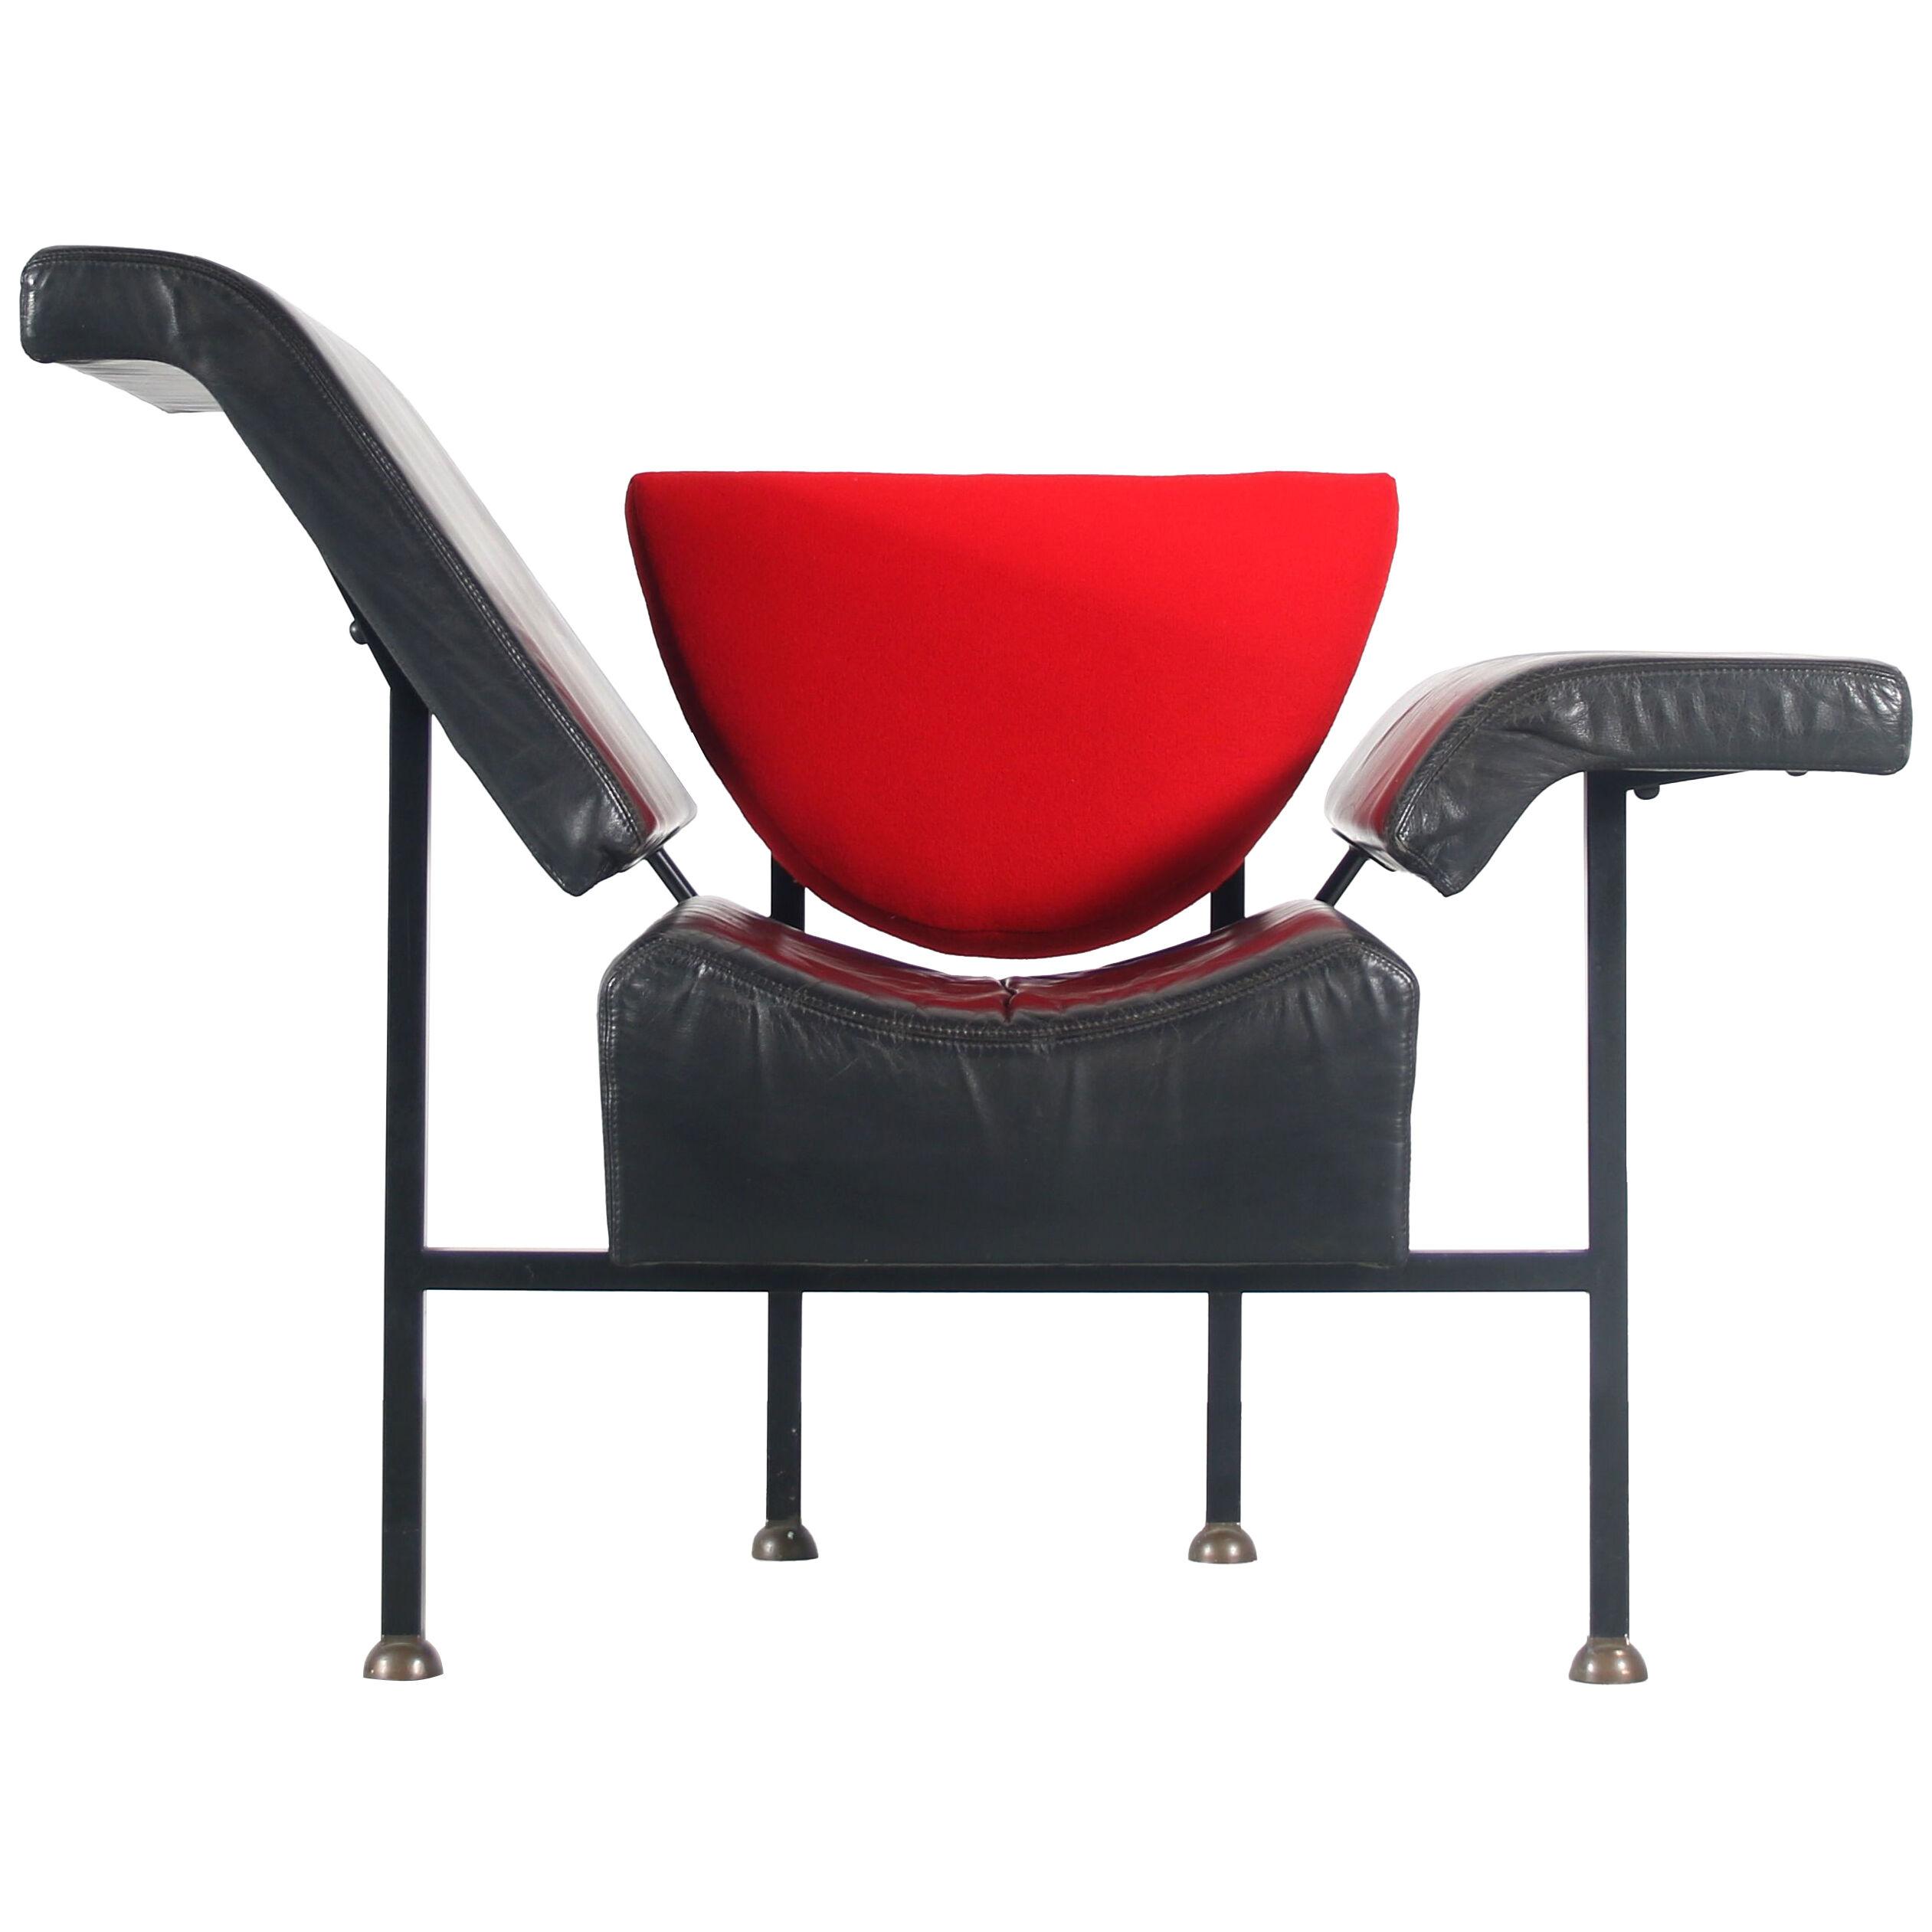 “Groeten Uit Holland” Chair by Rob Eckhardt for Pastoe, Netherlands 1980